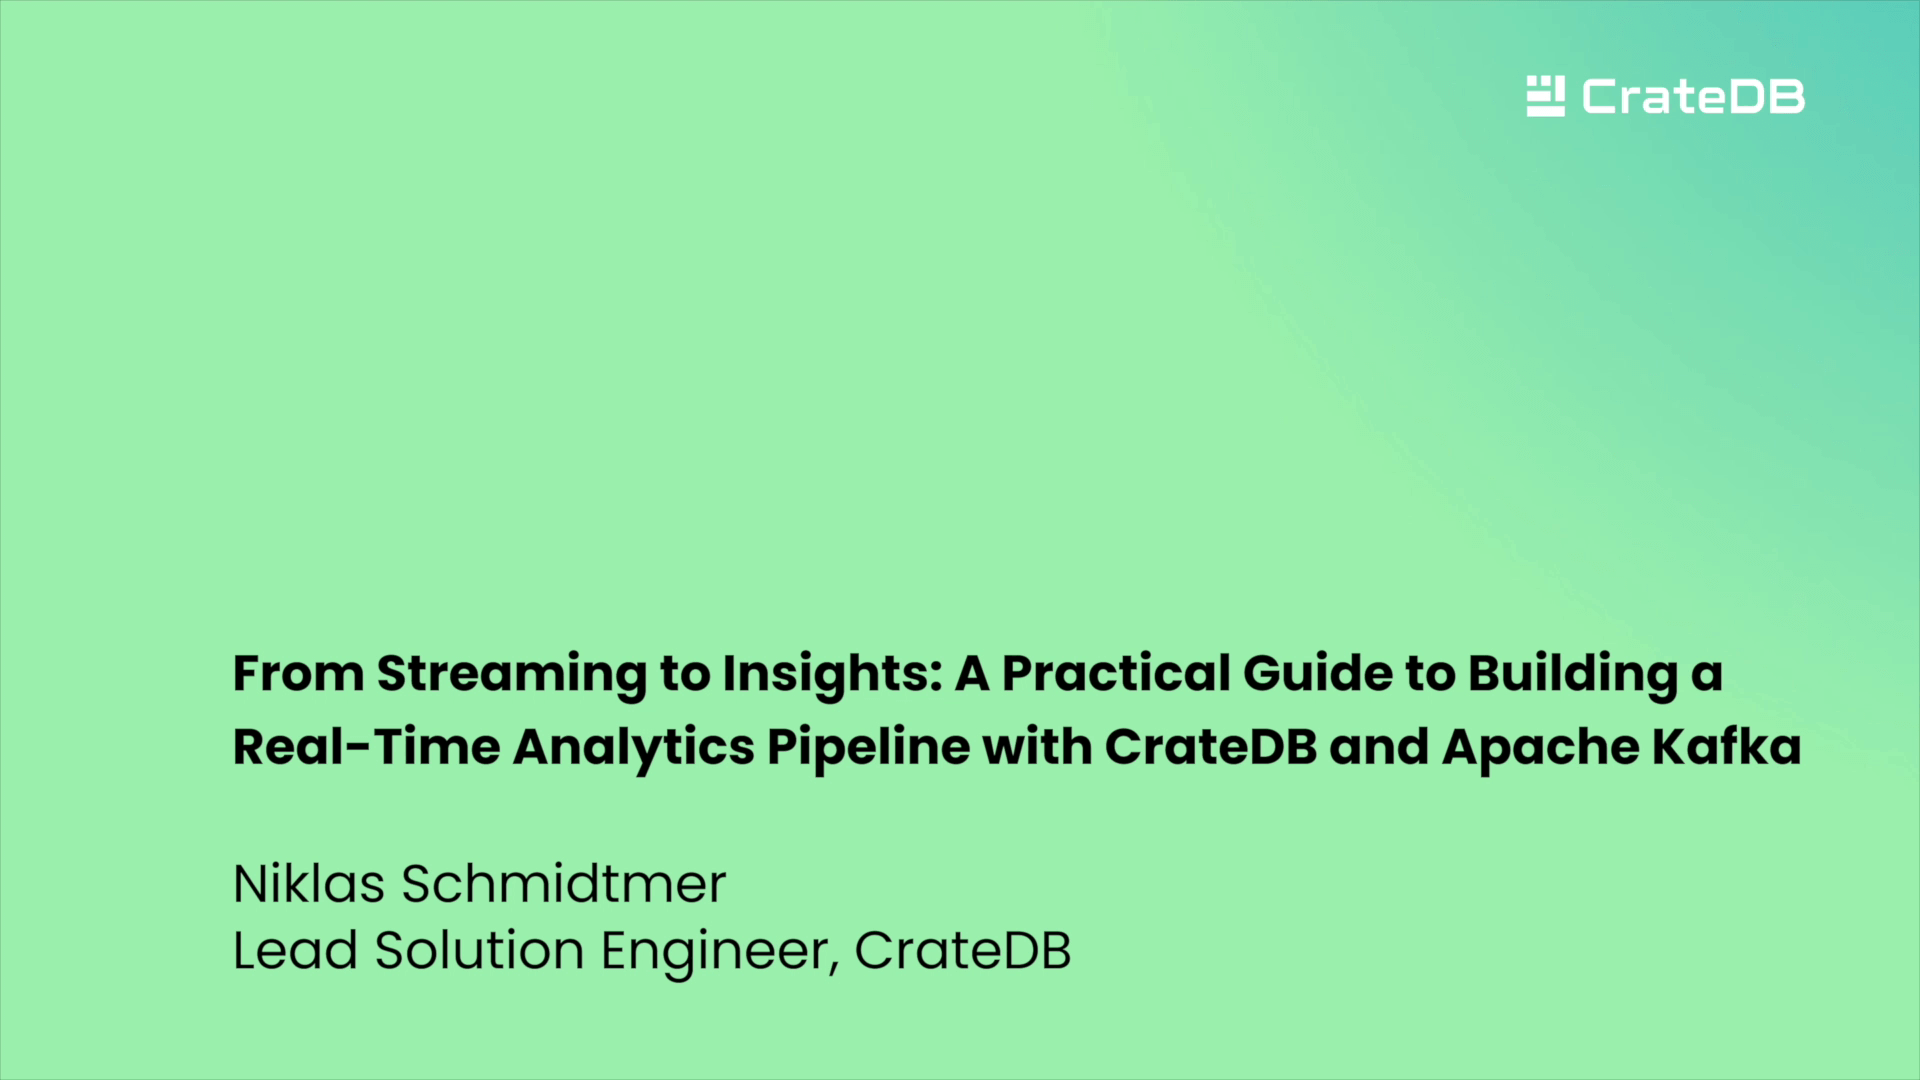 From streaming to insights 